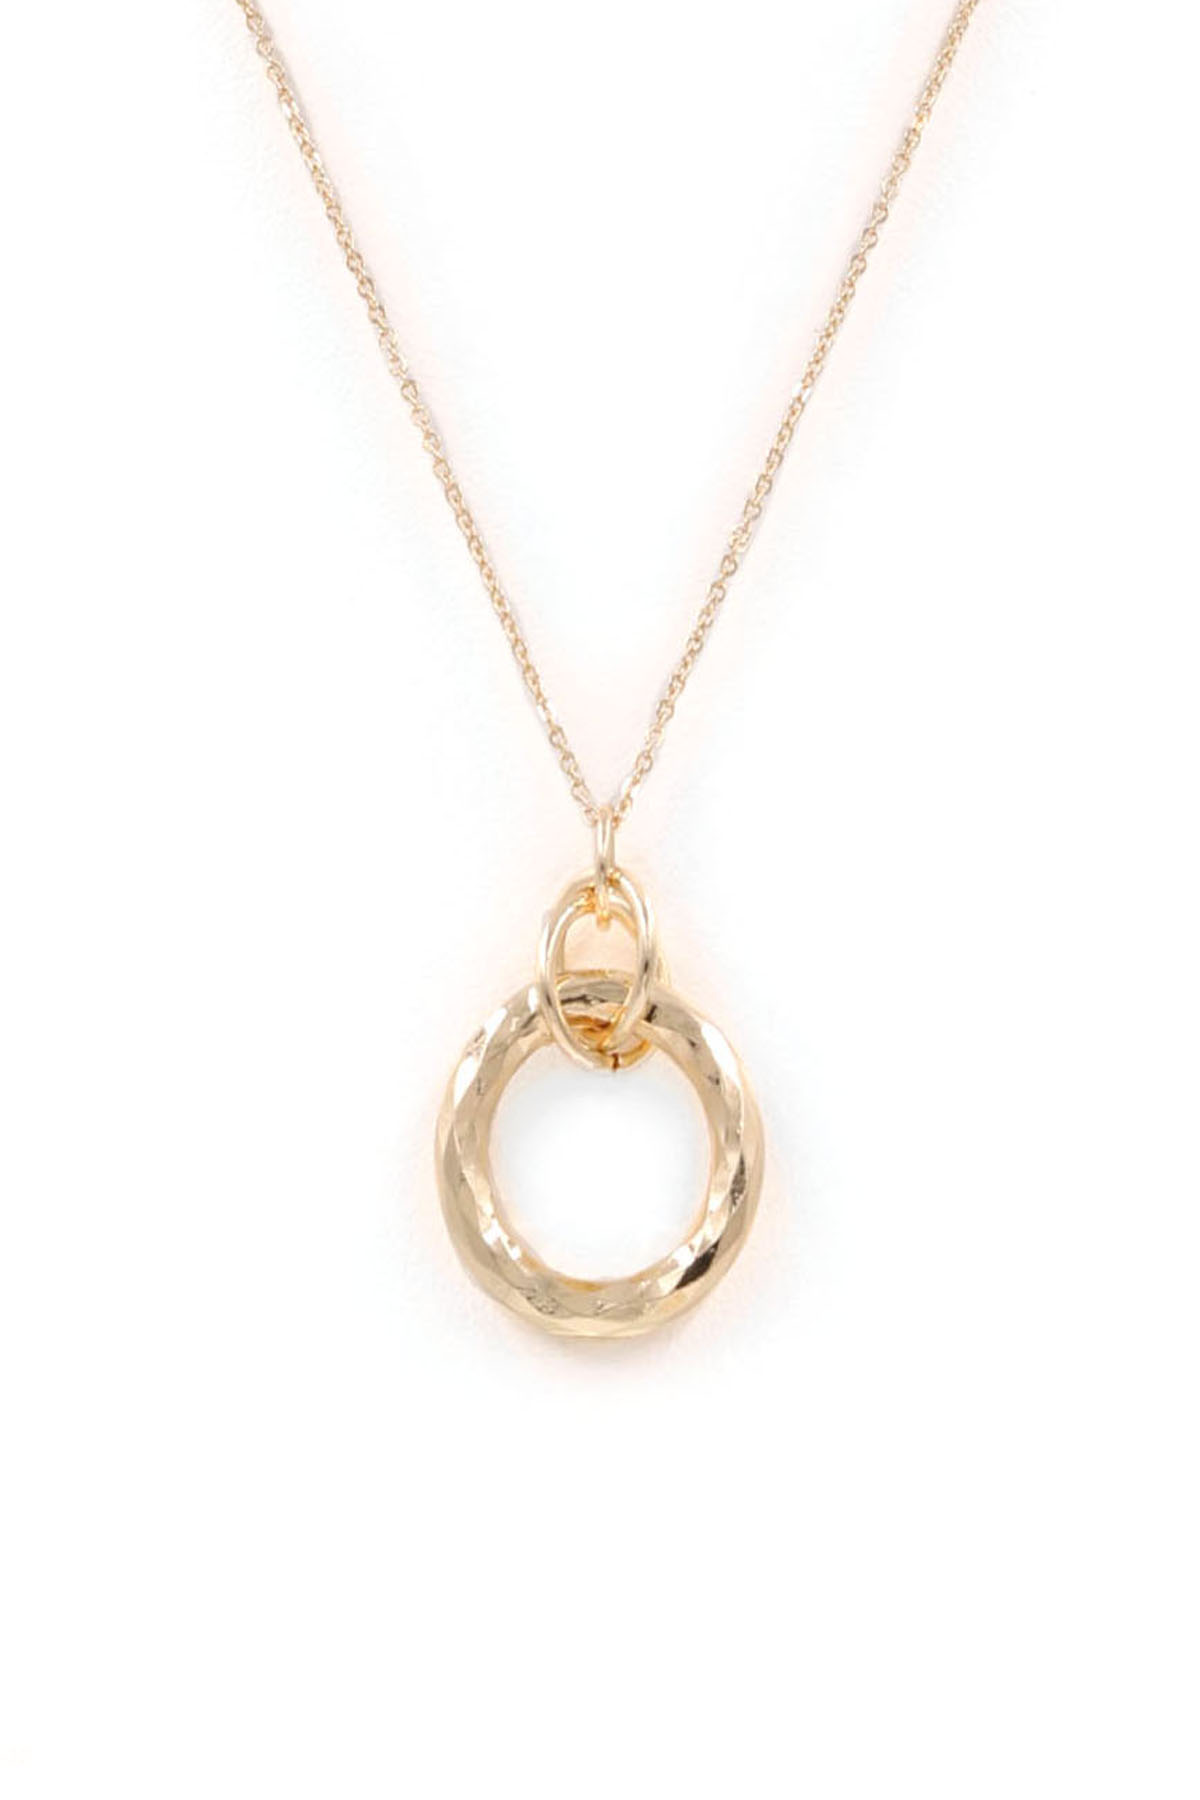 GOLD Ring Pendant Necklace - Necklaces